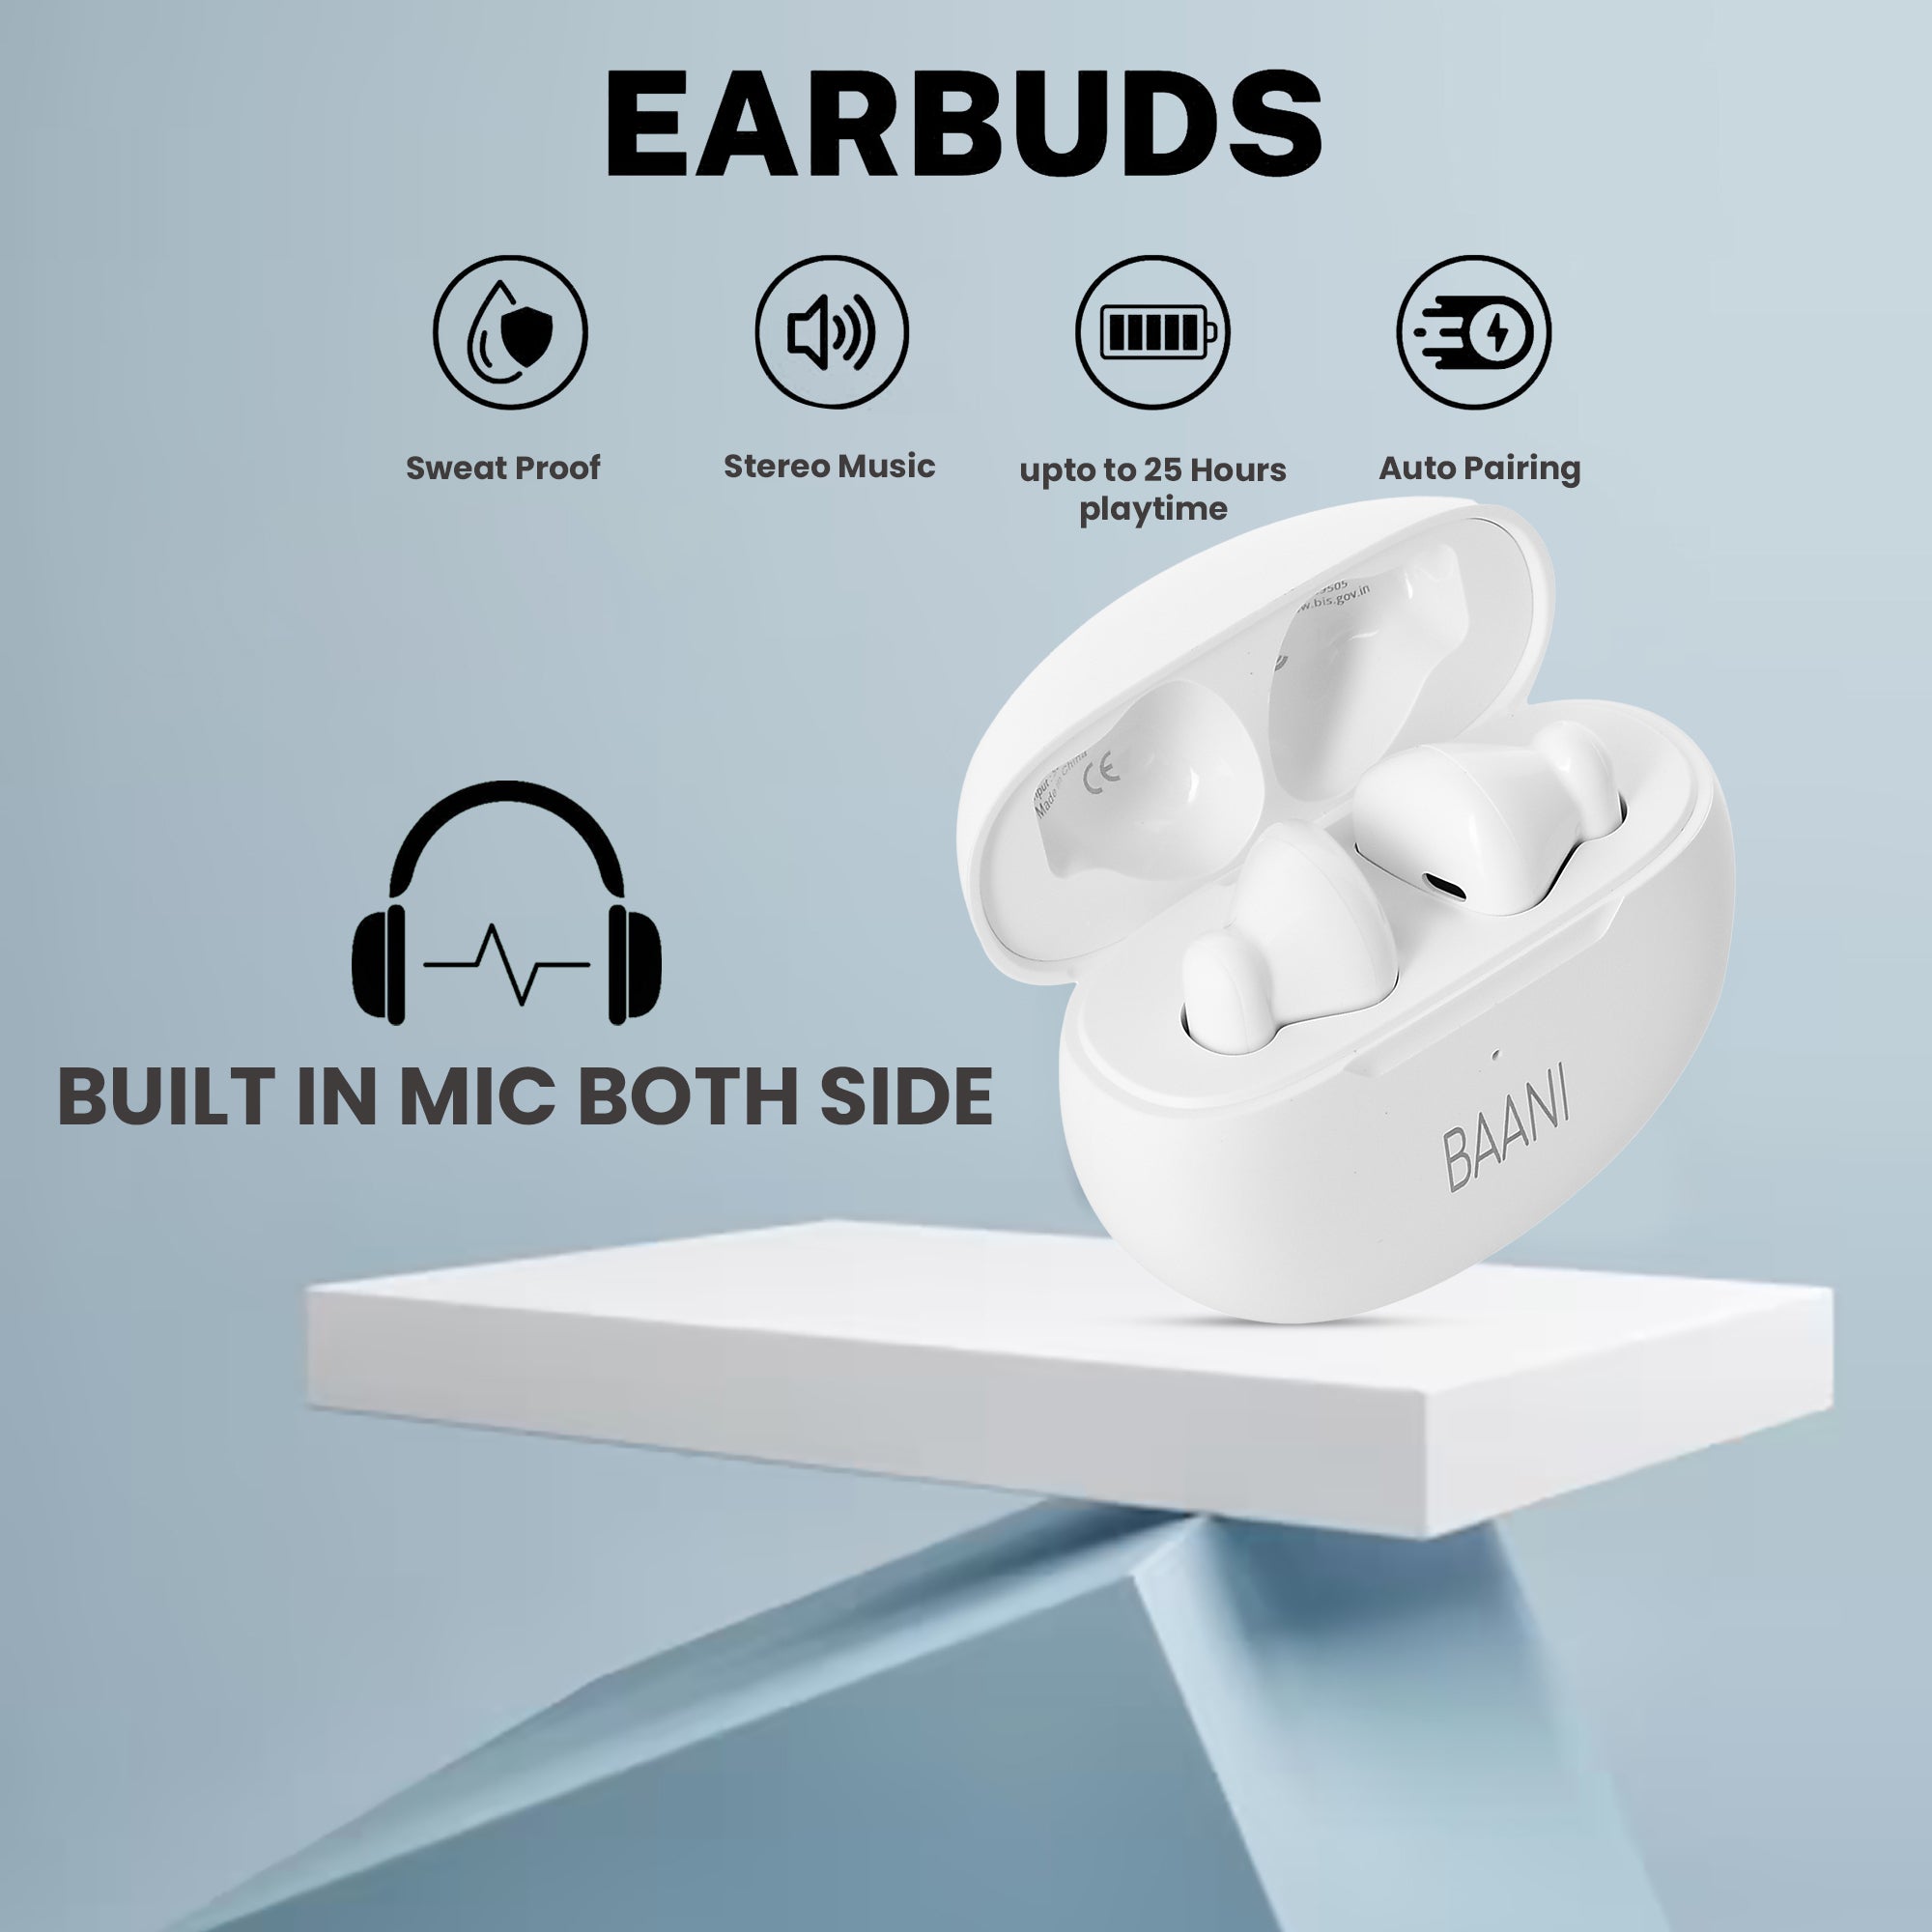 Features of white earbuds BT101 by Baani Audio